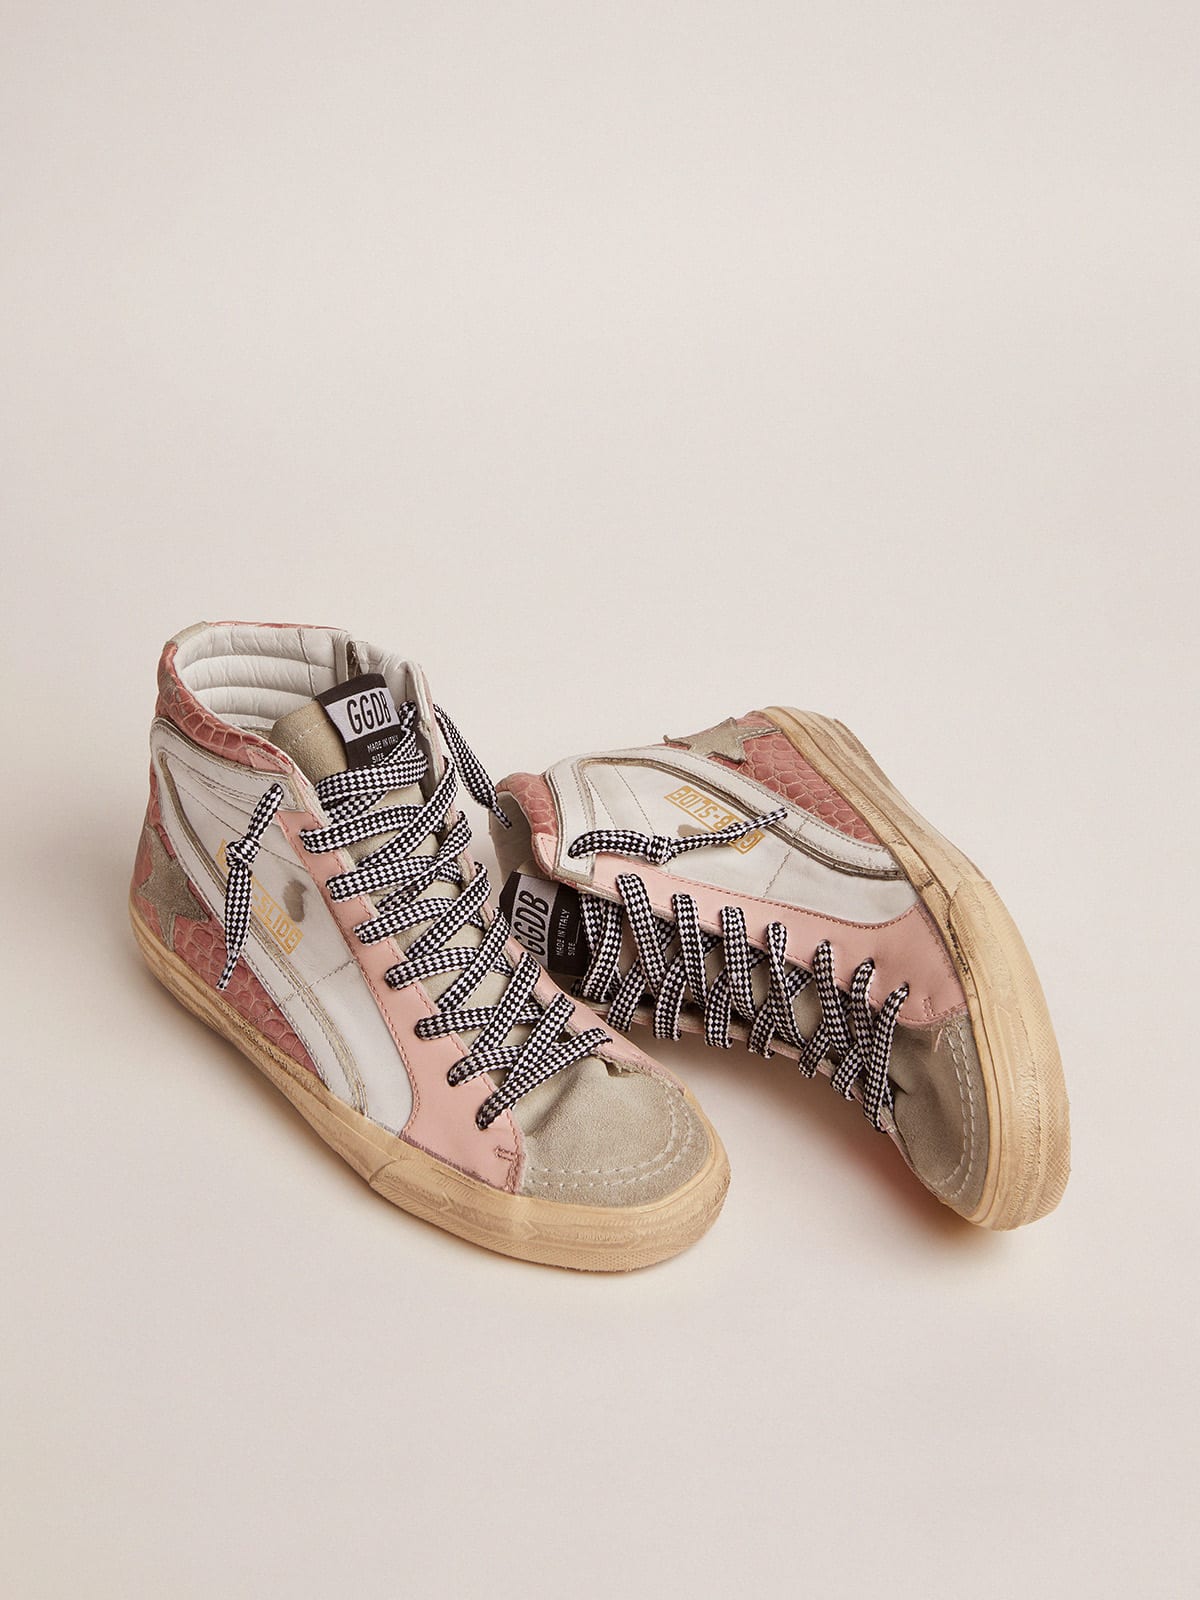 Slide sneakers with white leather and pink crocodile-print leather upper |  Golden Goose